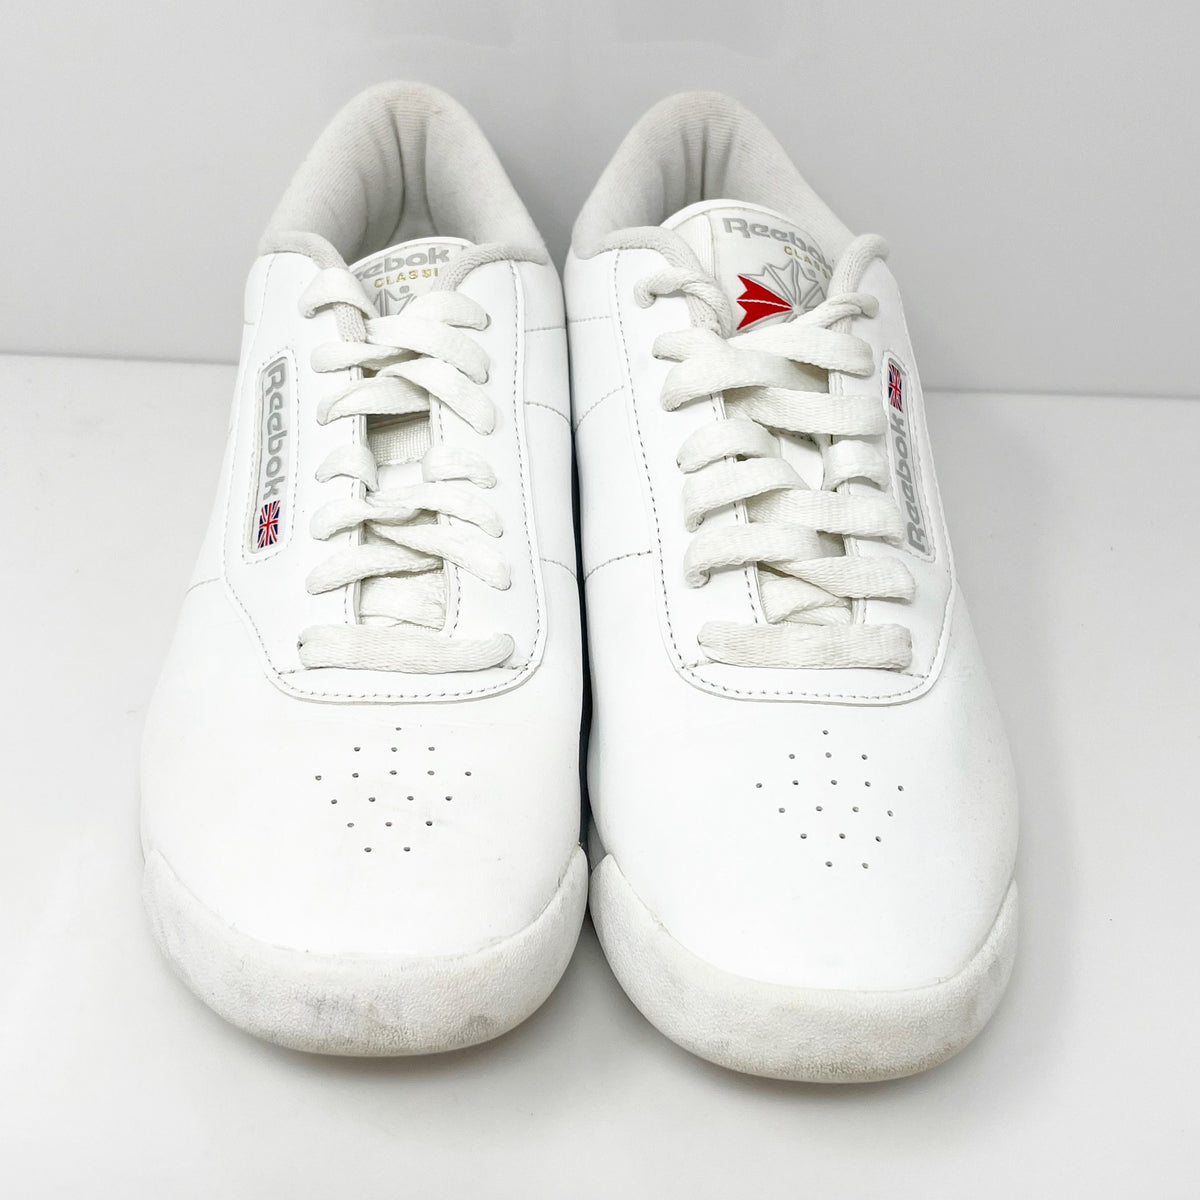 Reebok Womens Classic Princess 1475 White Casual Shoes Sneakers Size 9 ...